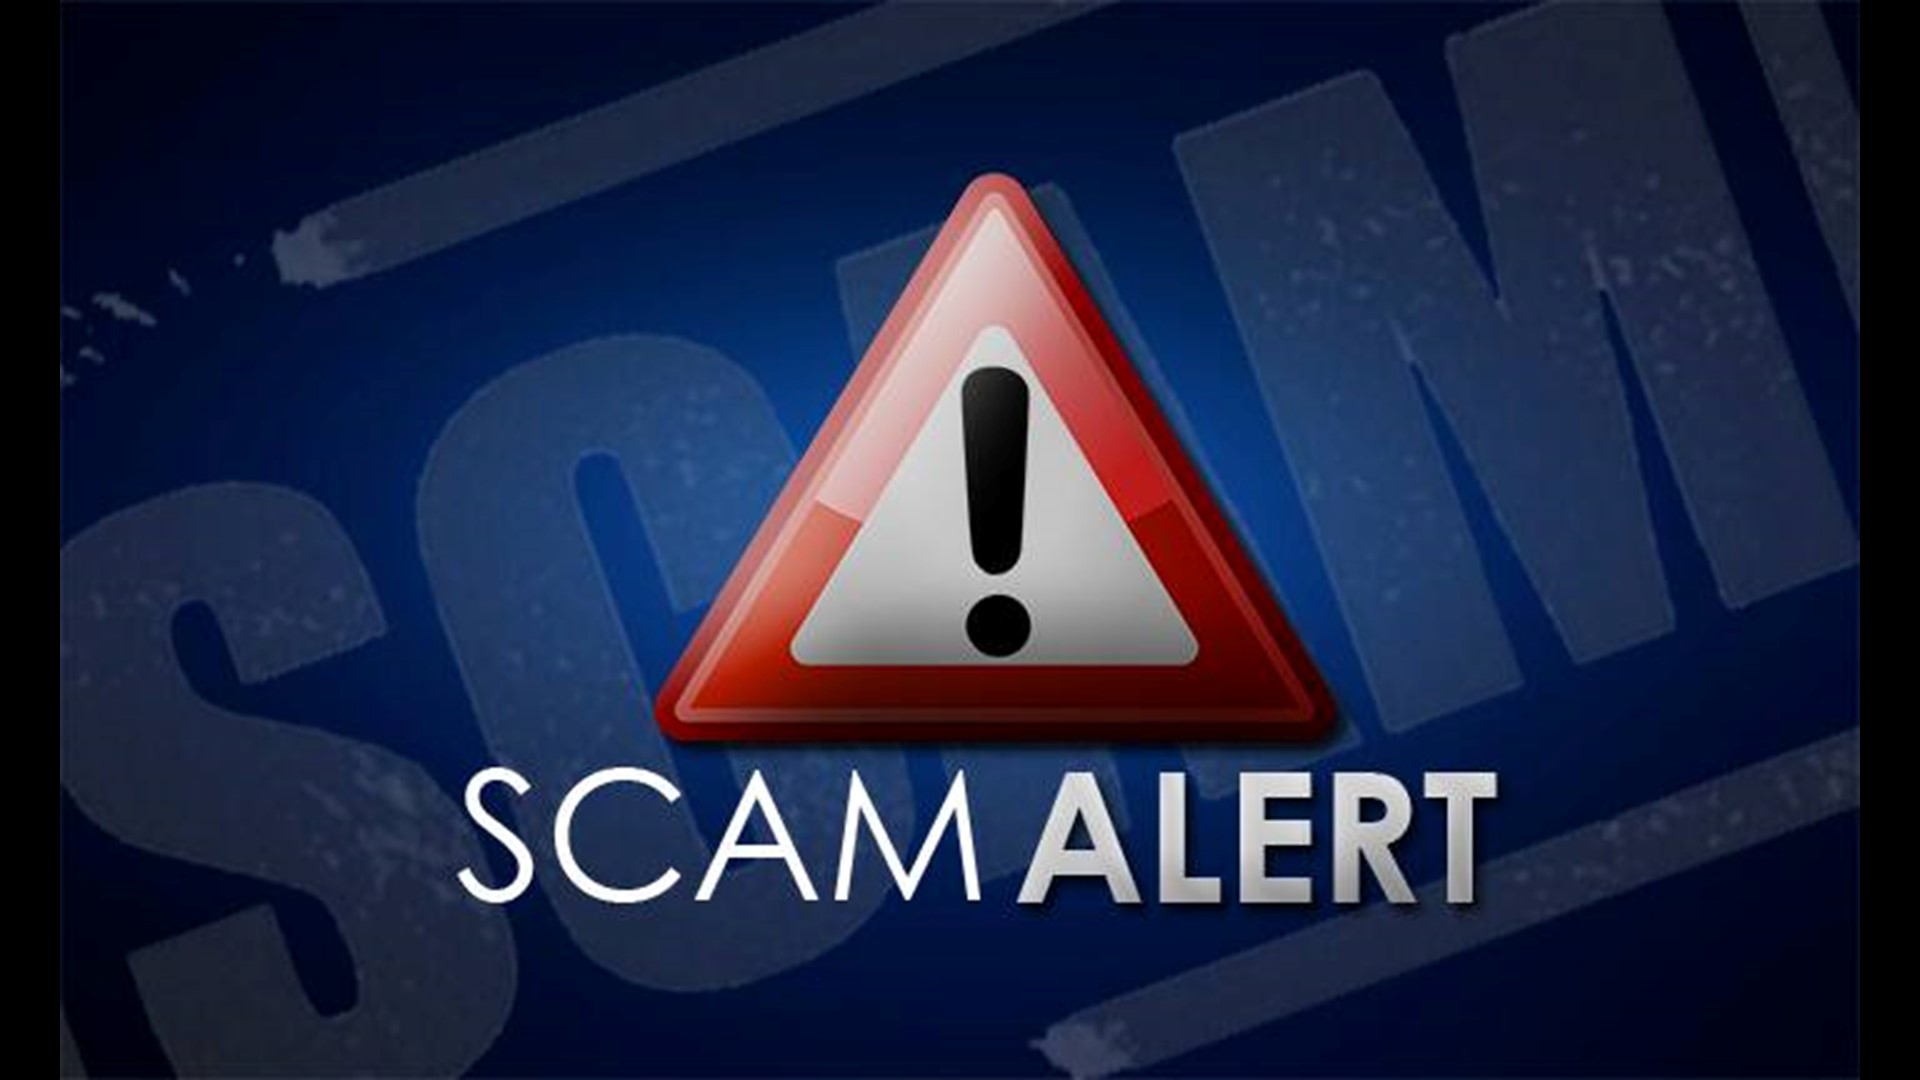 Aransas County residents have received calls asking for payment on a warrant.